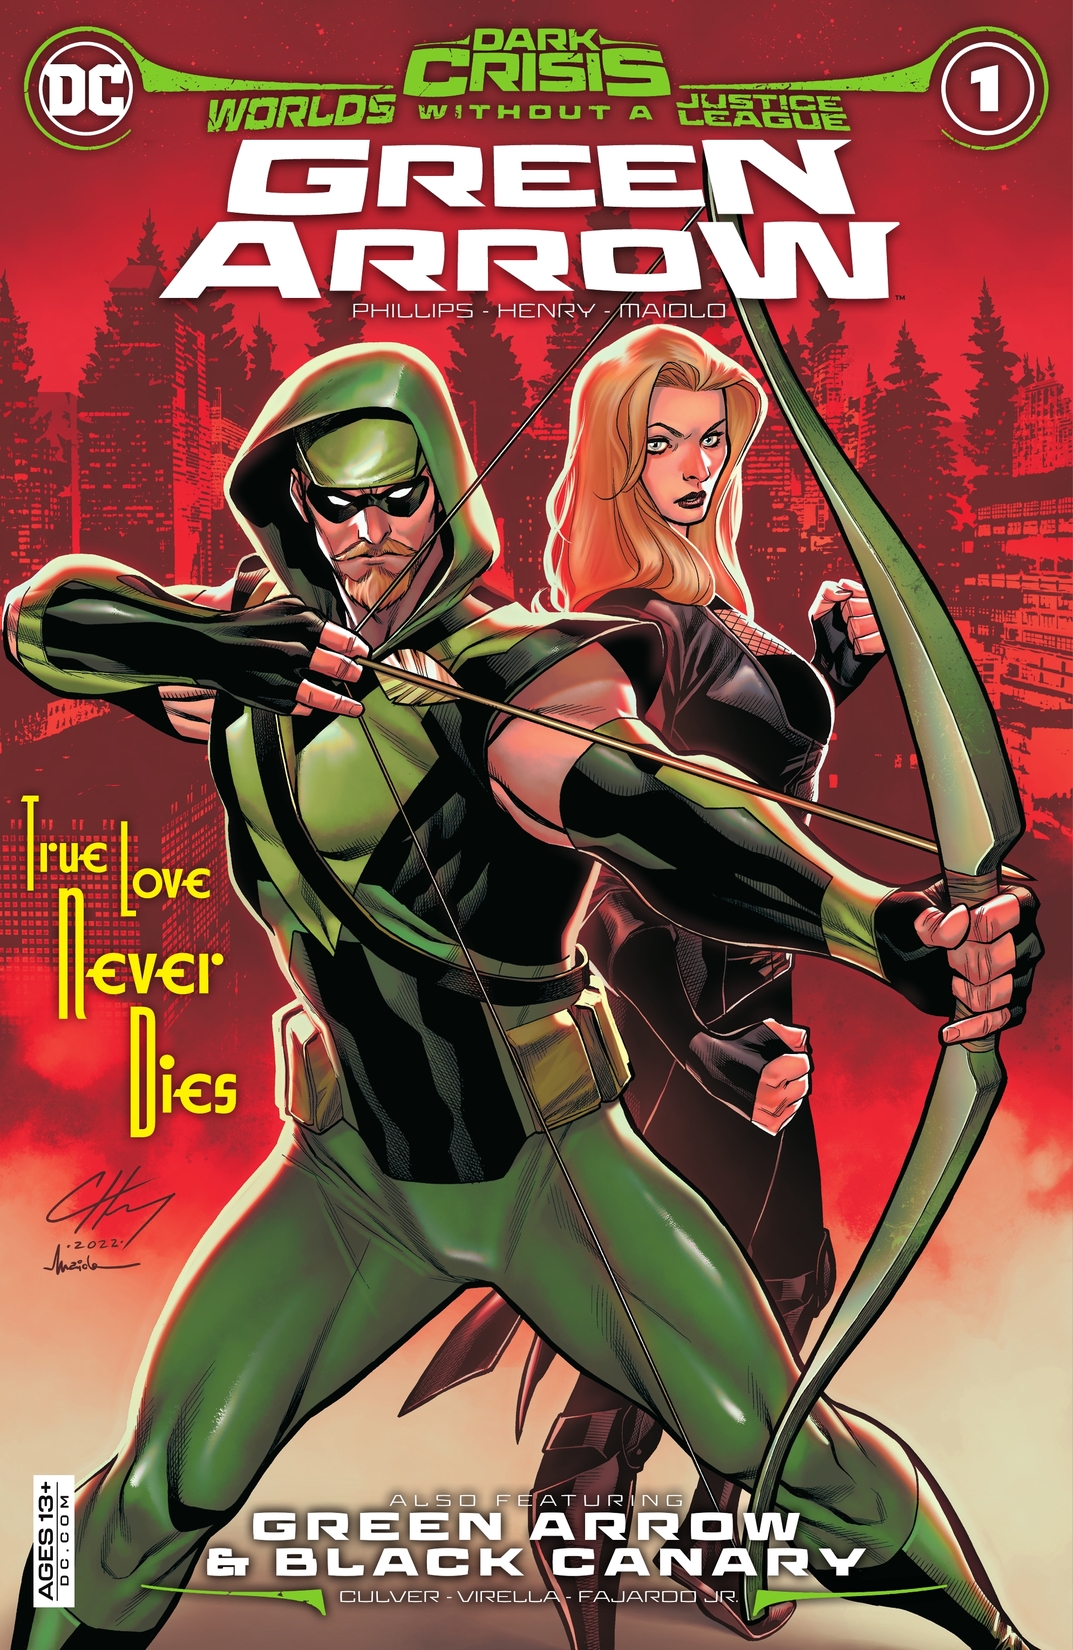 Dark Crisis: Worlds Without A Justice League - Green Arrow #1 preview images